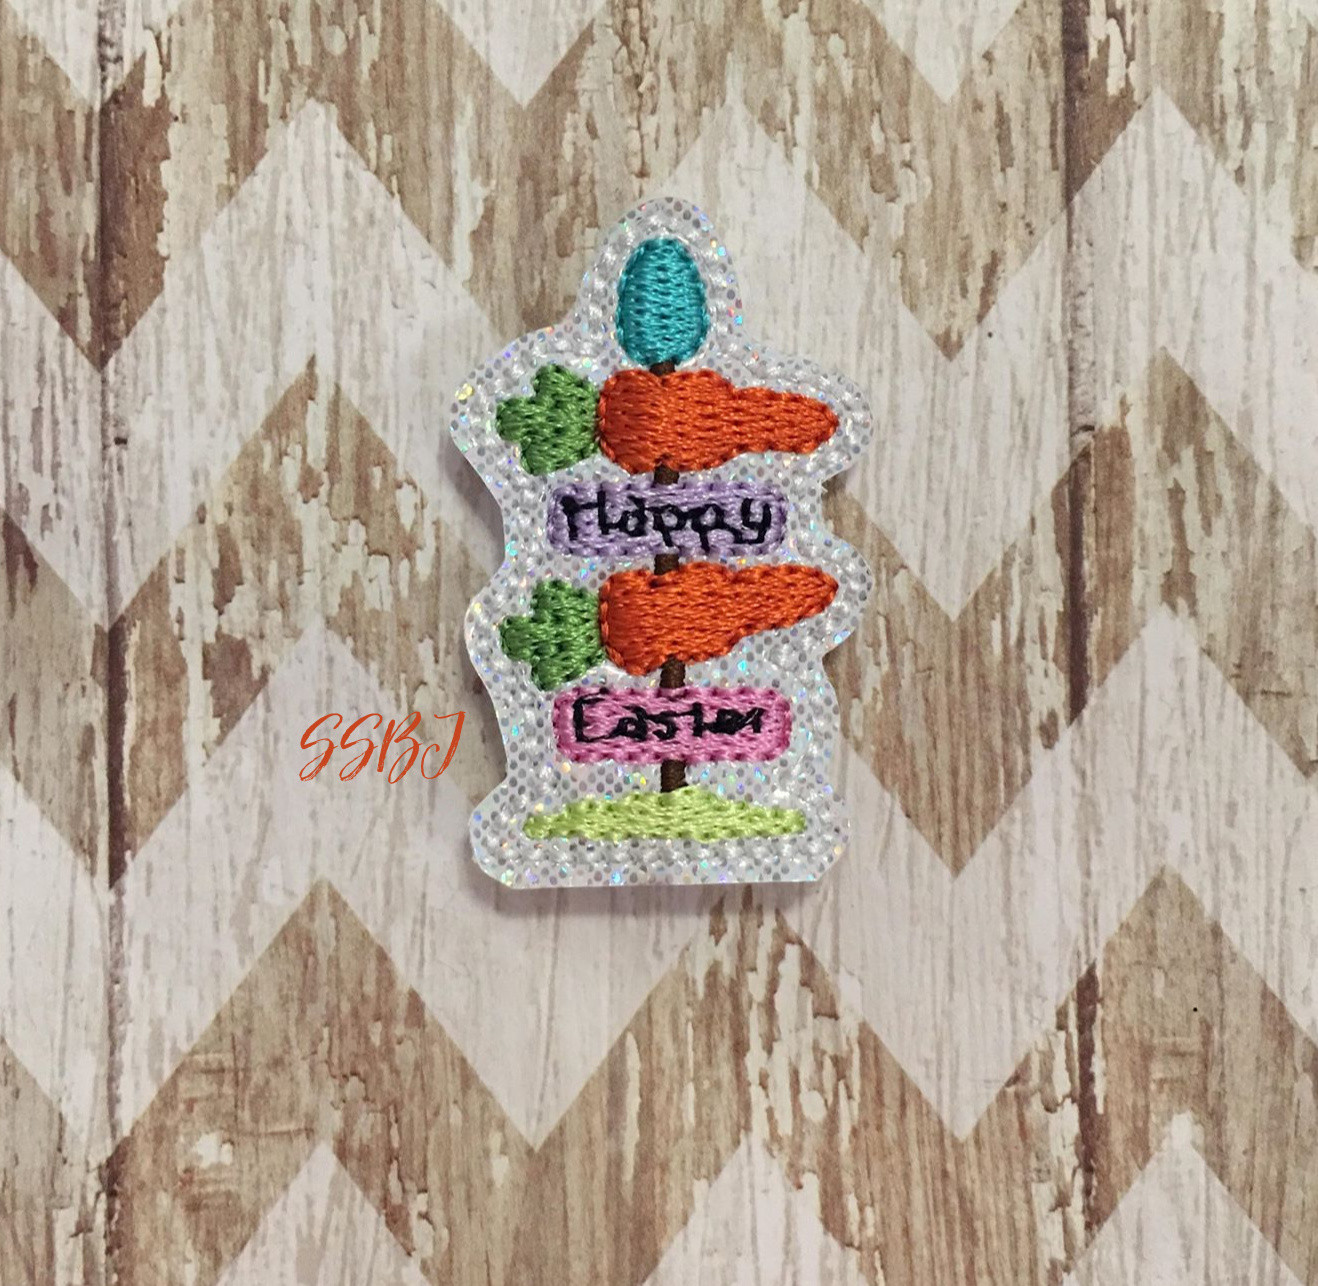 SSBJ Easter Fun Sign Embroidery File